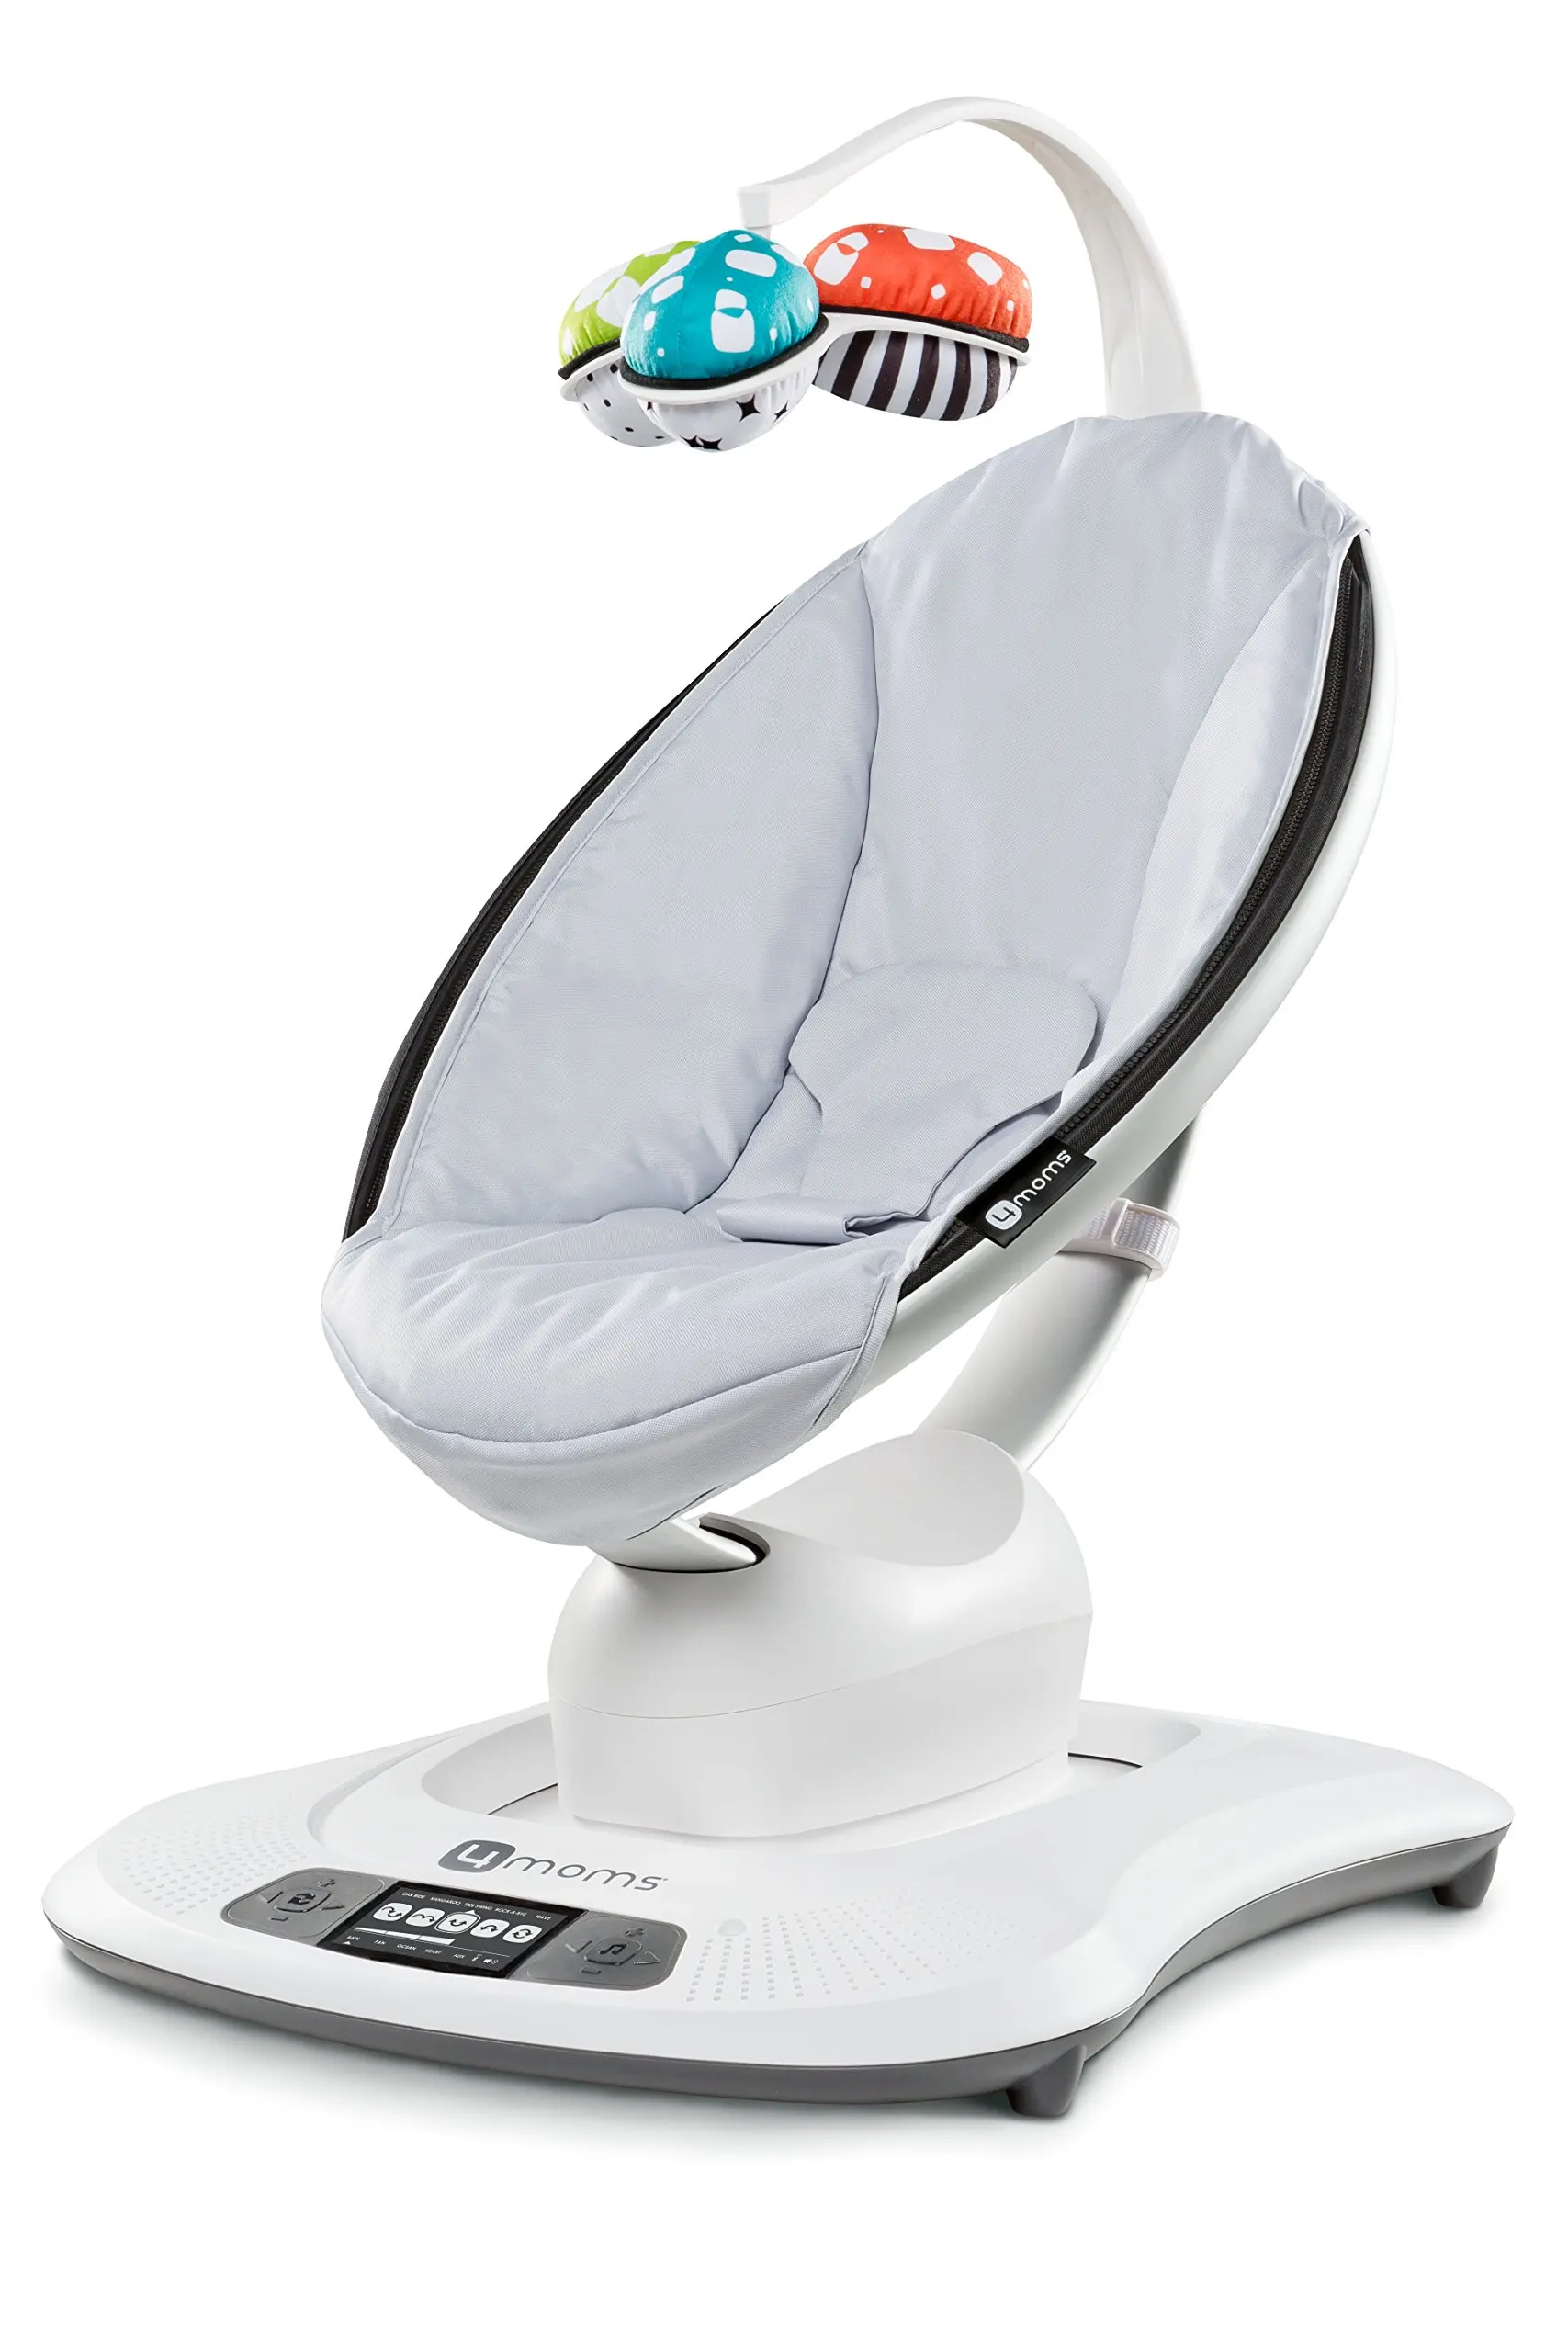 Cheap Mamaroo, find Mamaroo deals on 